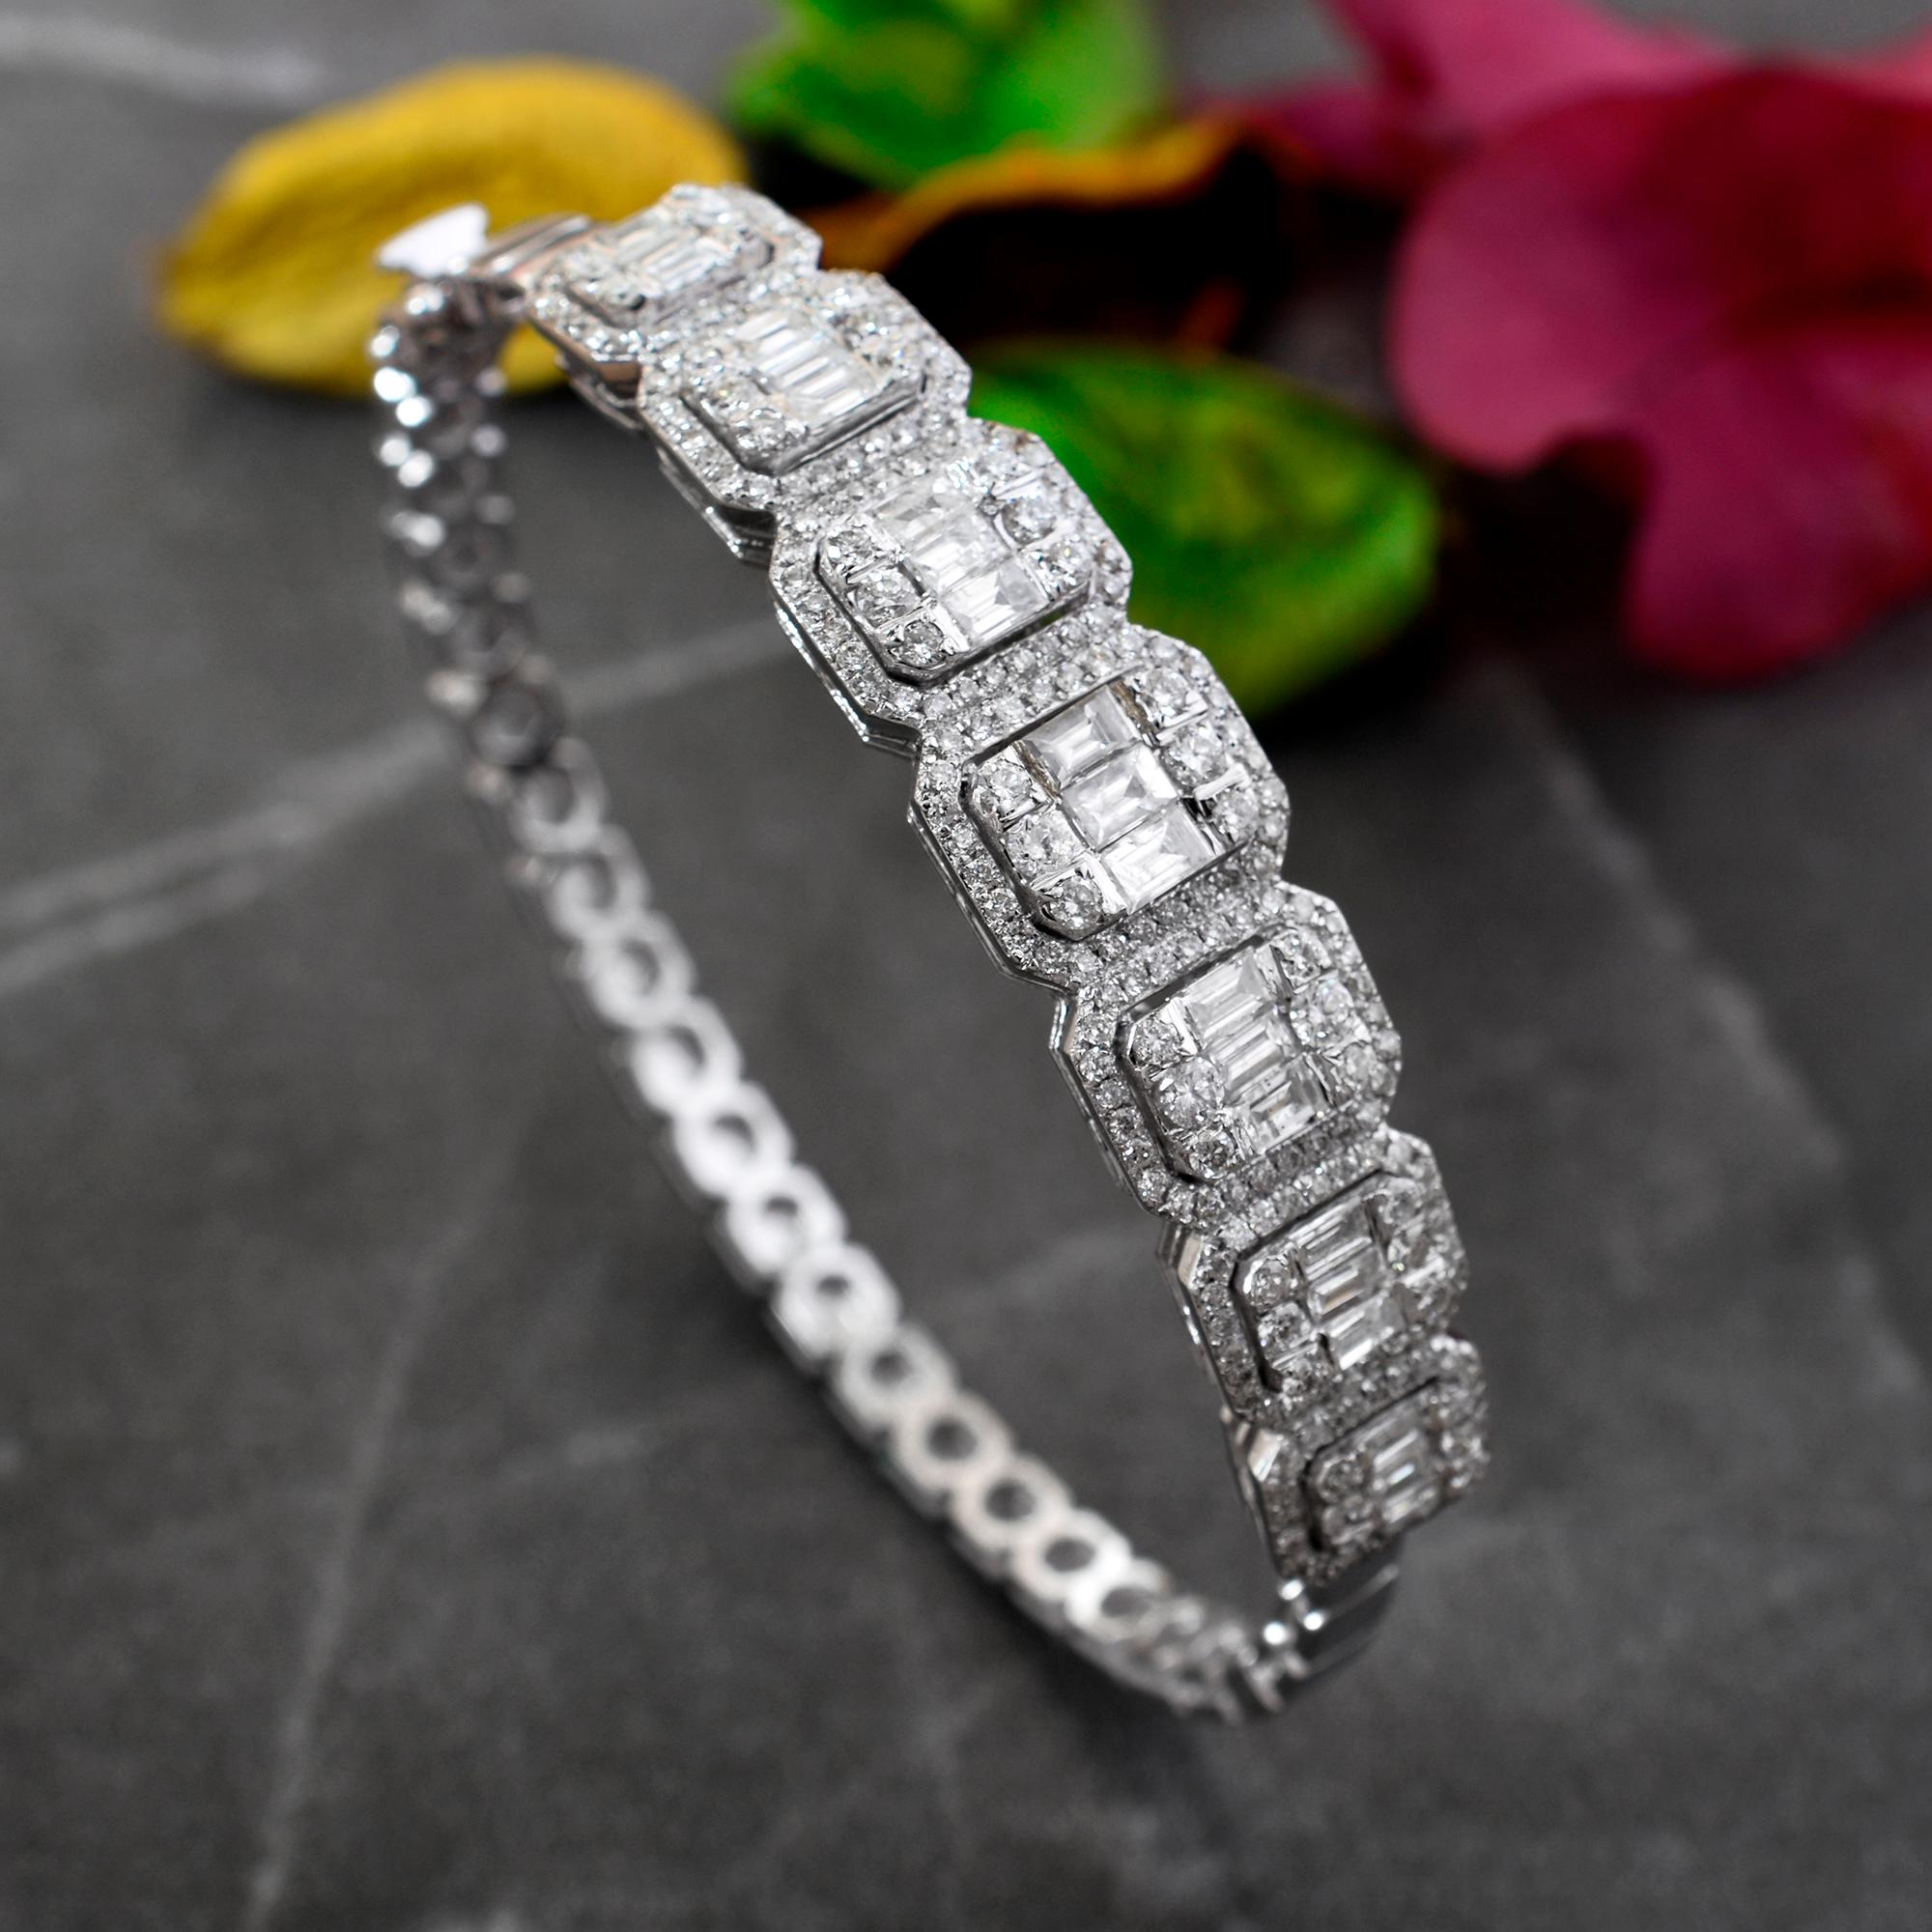 The design of the bracelet is both sleek and sophisticated, with a timeless silhouette that complements any ensemble. Whether worn alone as a statement piece or layered with other bracelets for a more personalized look, this Baguette Round Diamond